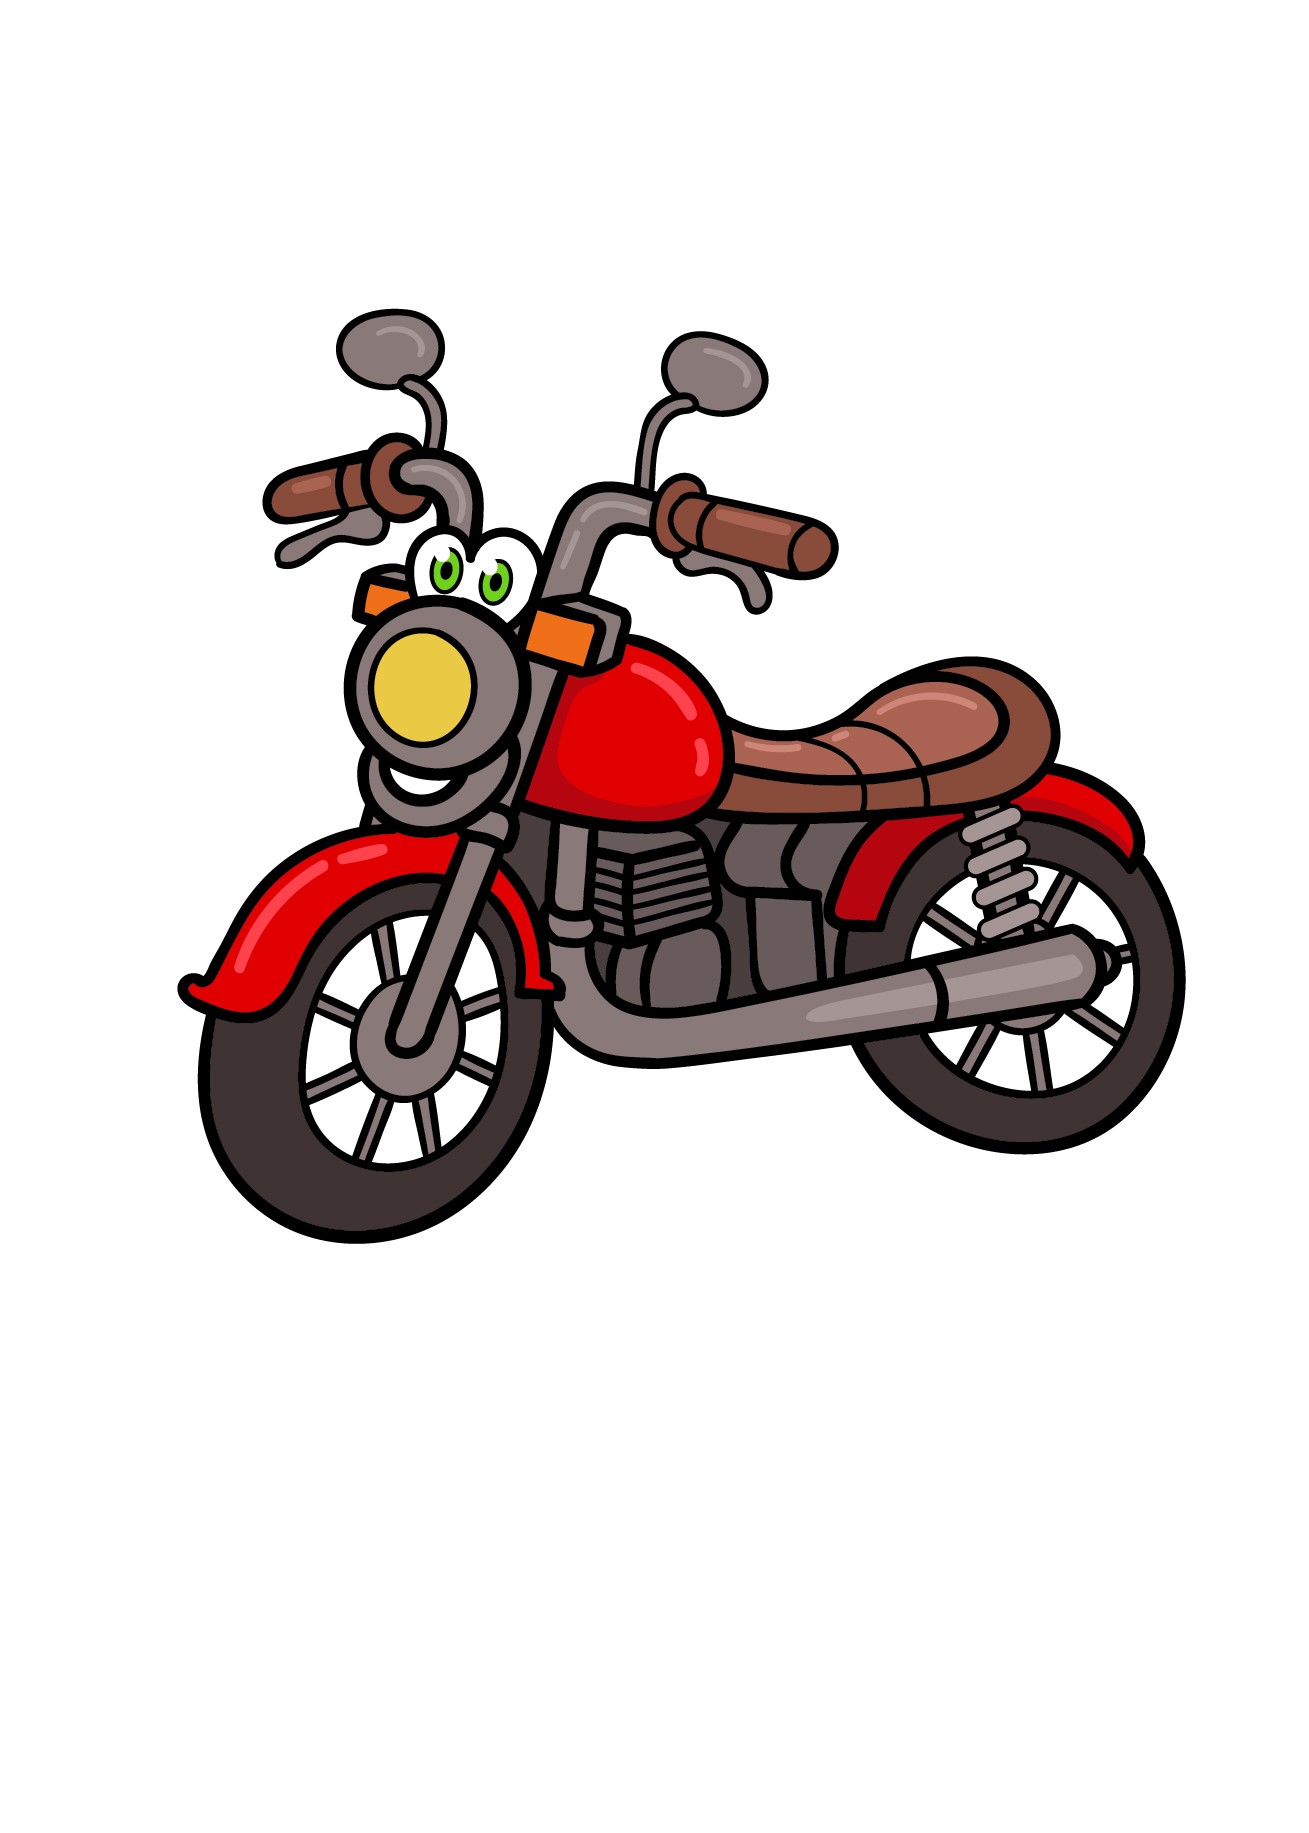 How to draw a cartoon motorcycle